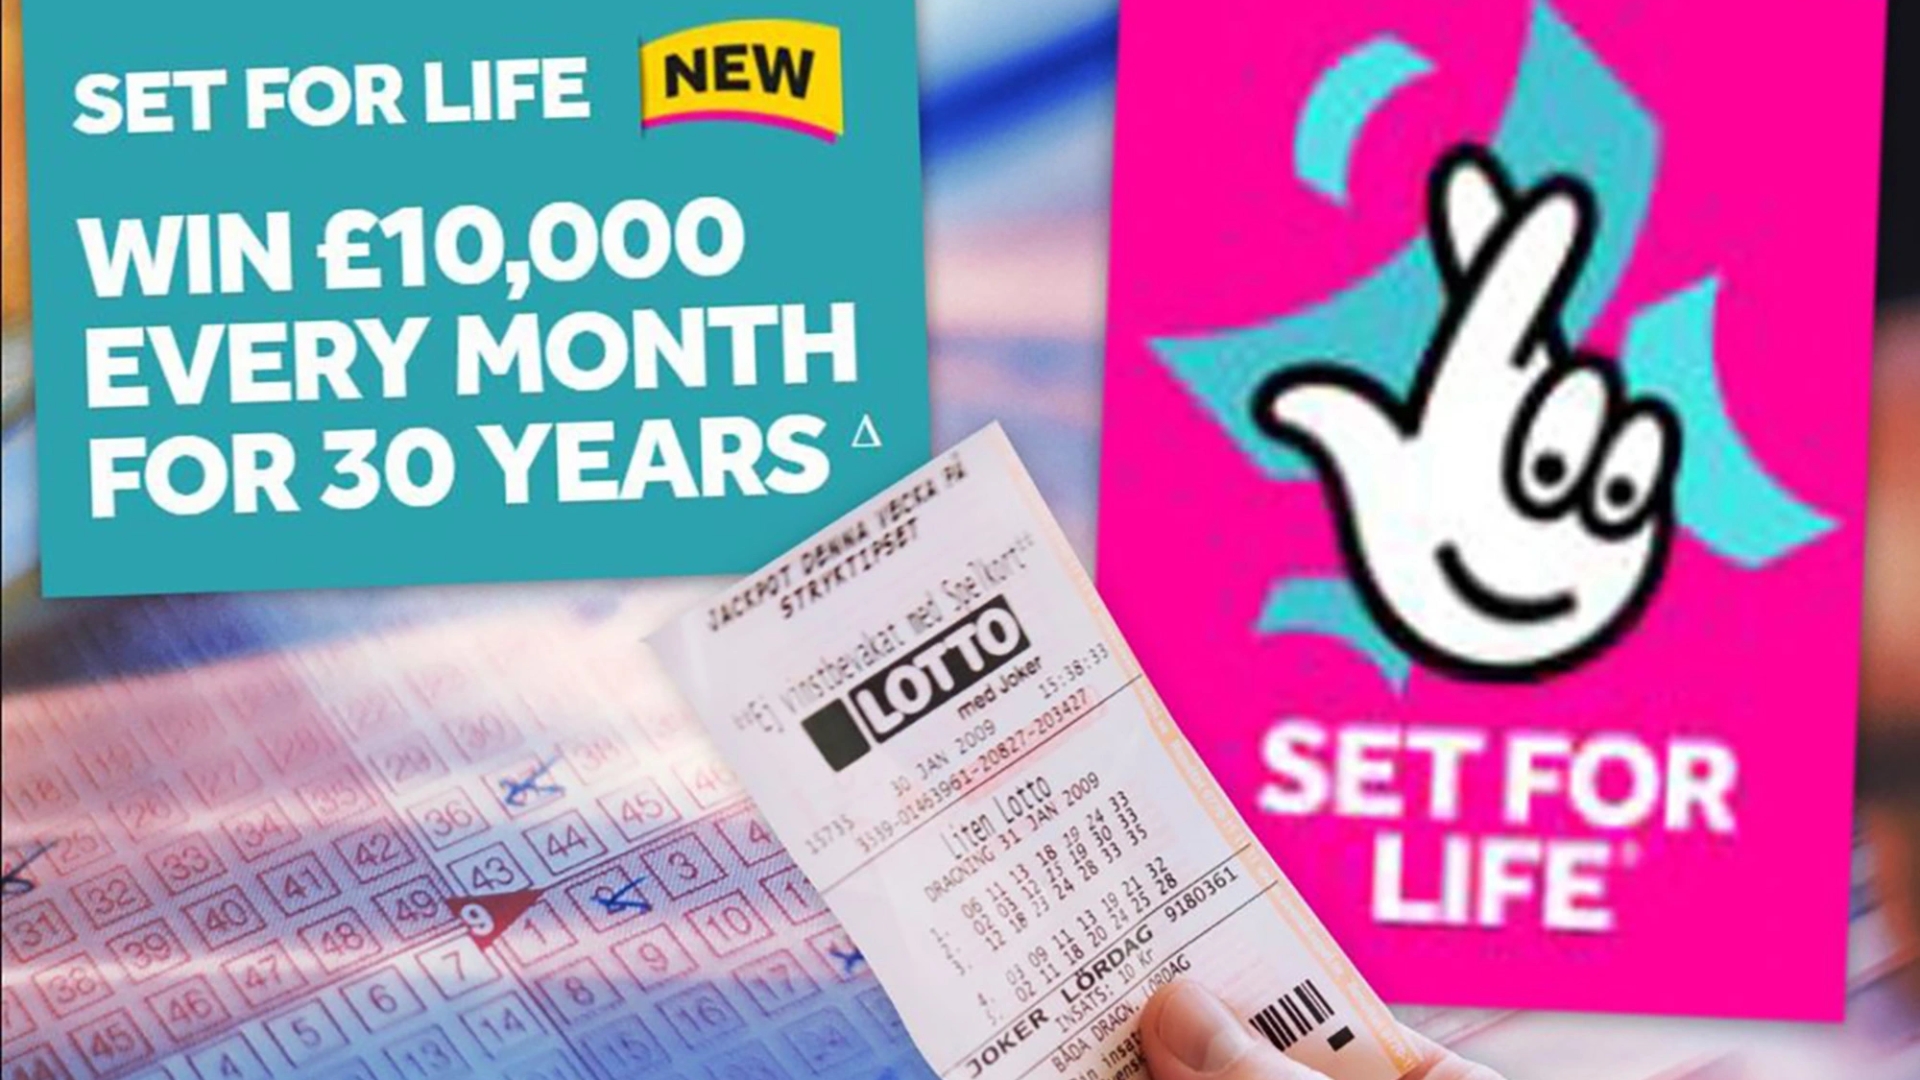 Results and numbers from the Lottery: Set For Life draw tonight (September 26th).